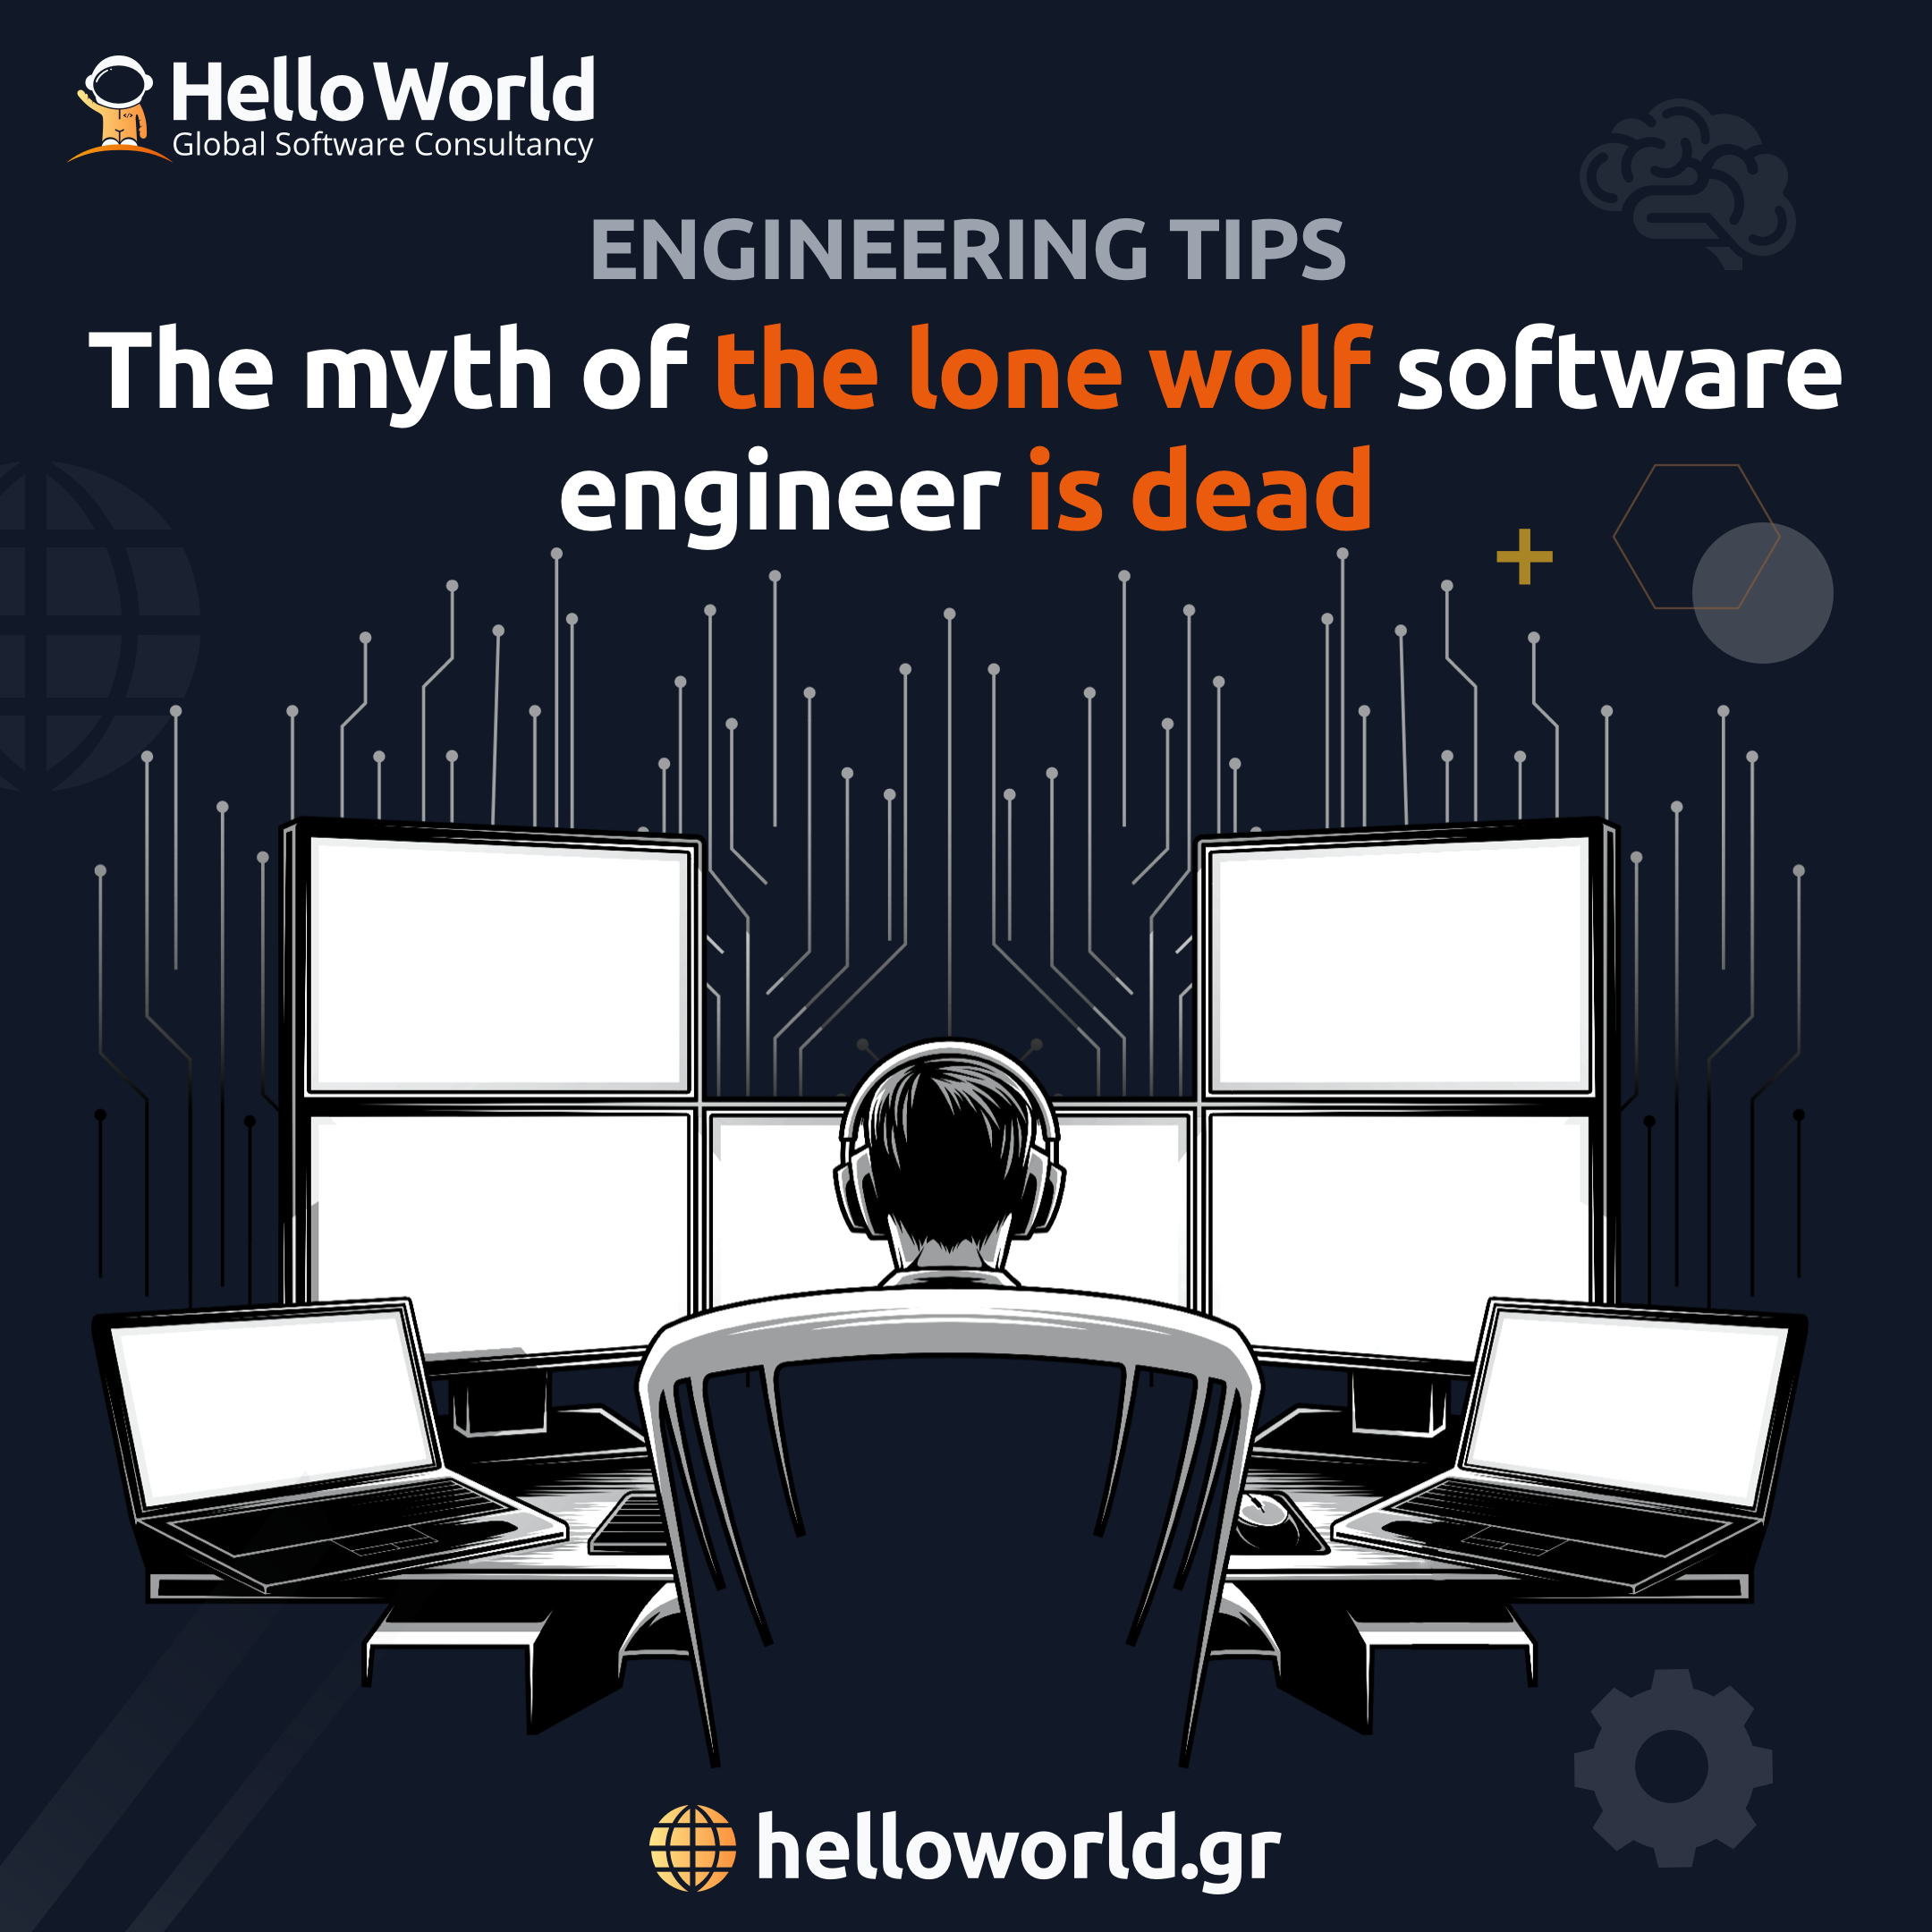 The myth of the lone wolf software engineer is dead